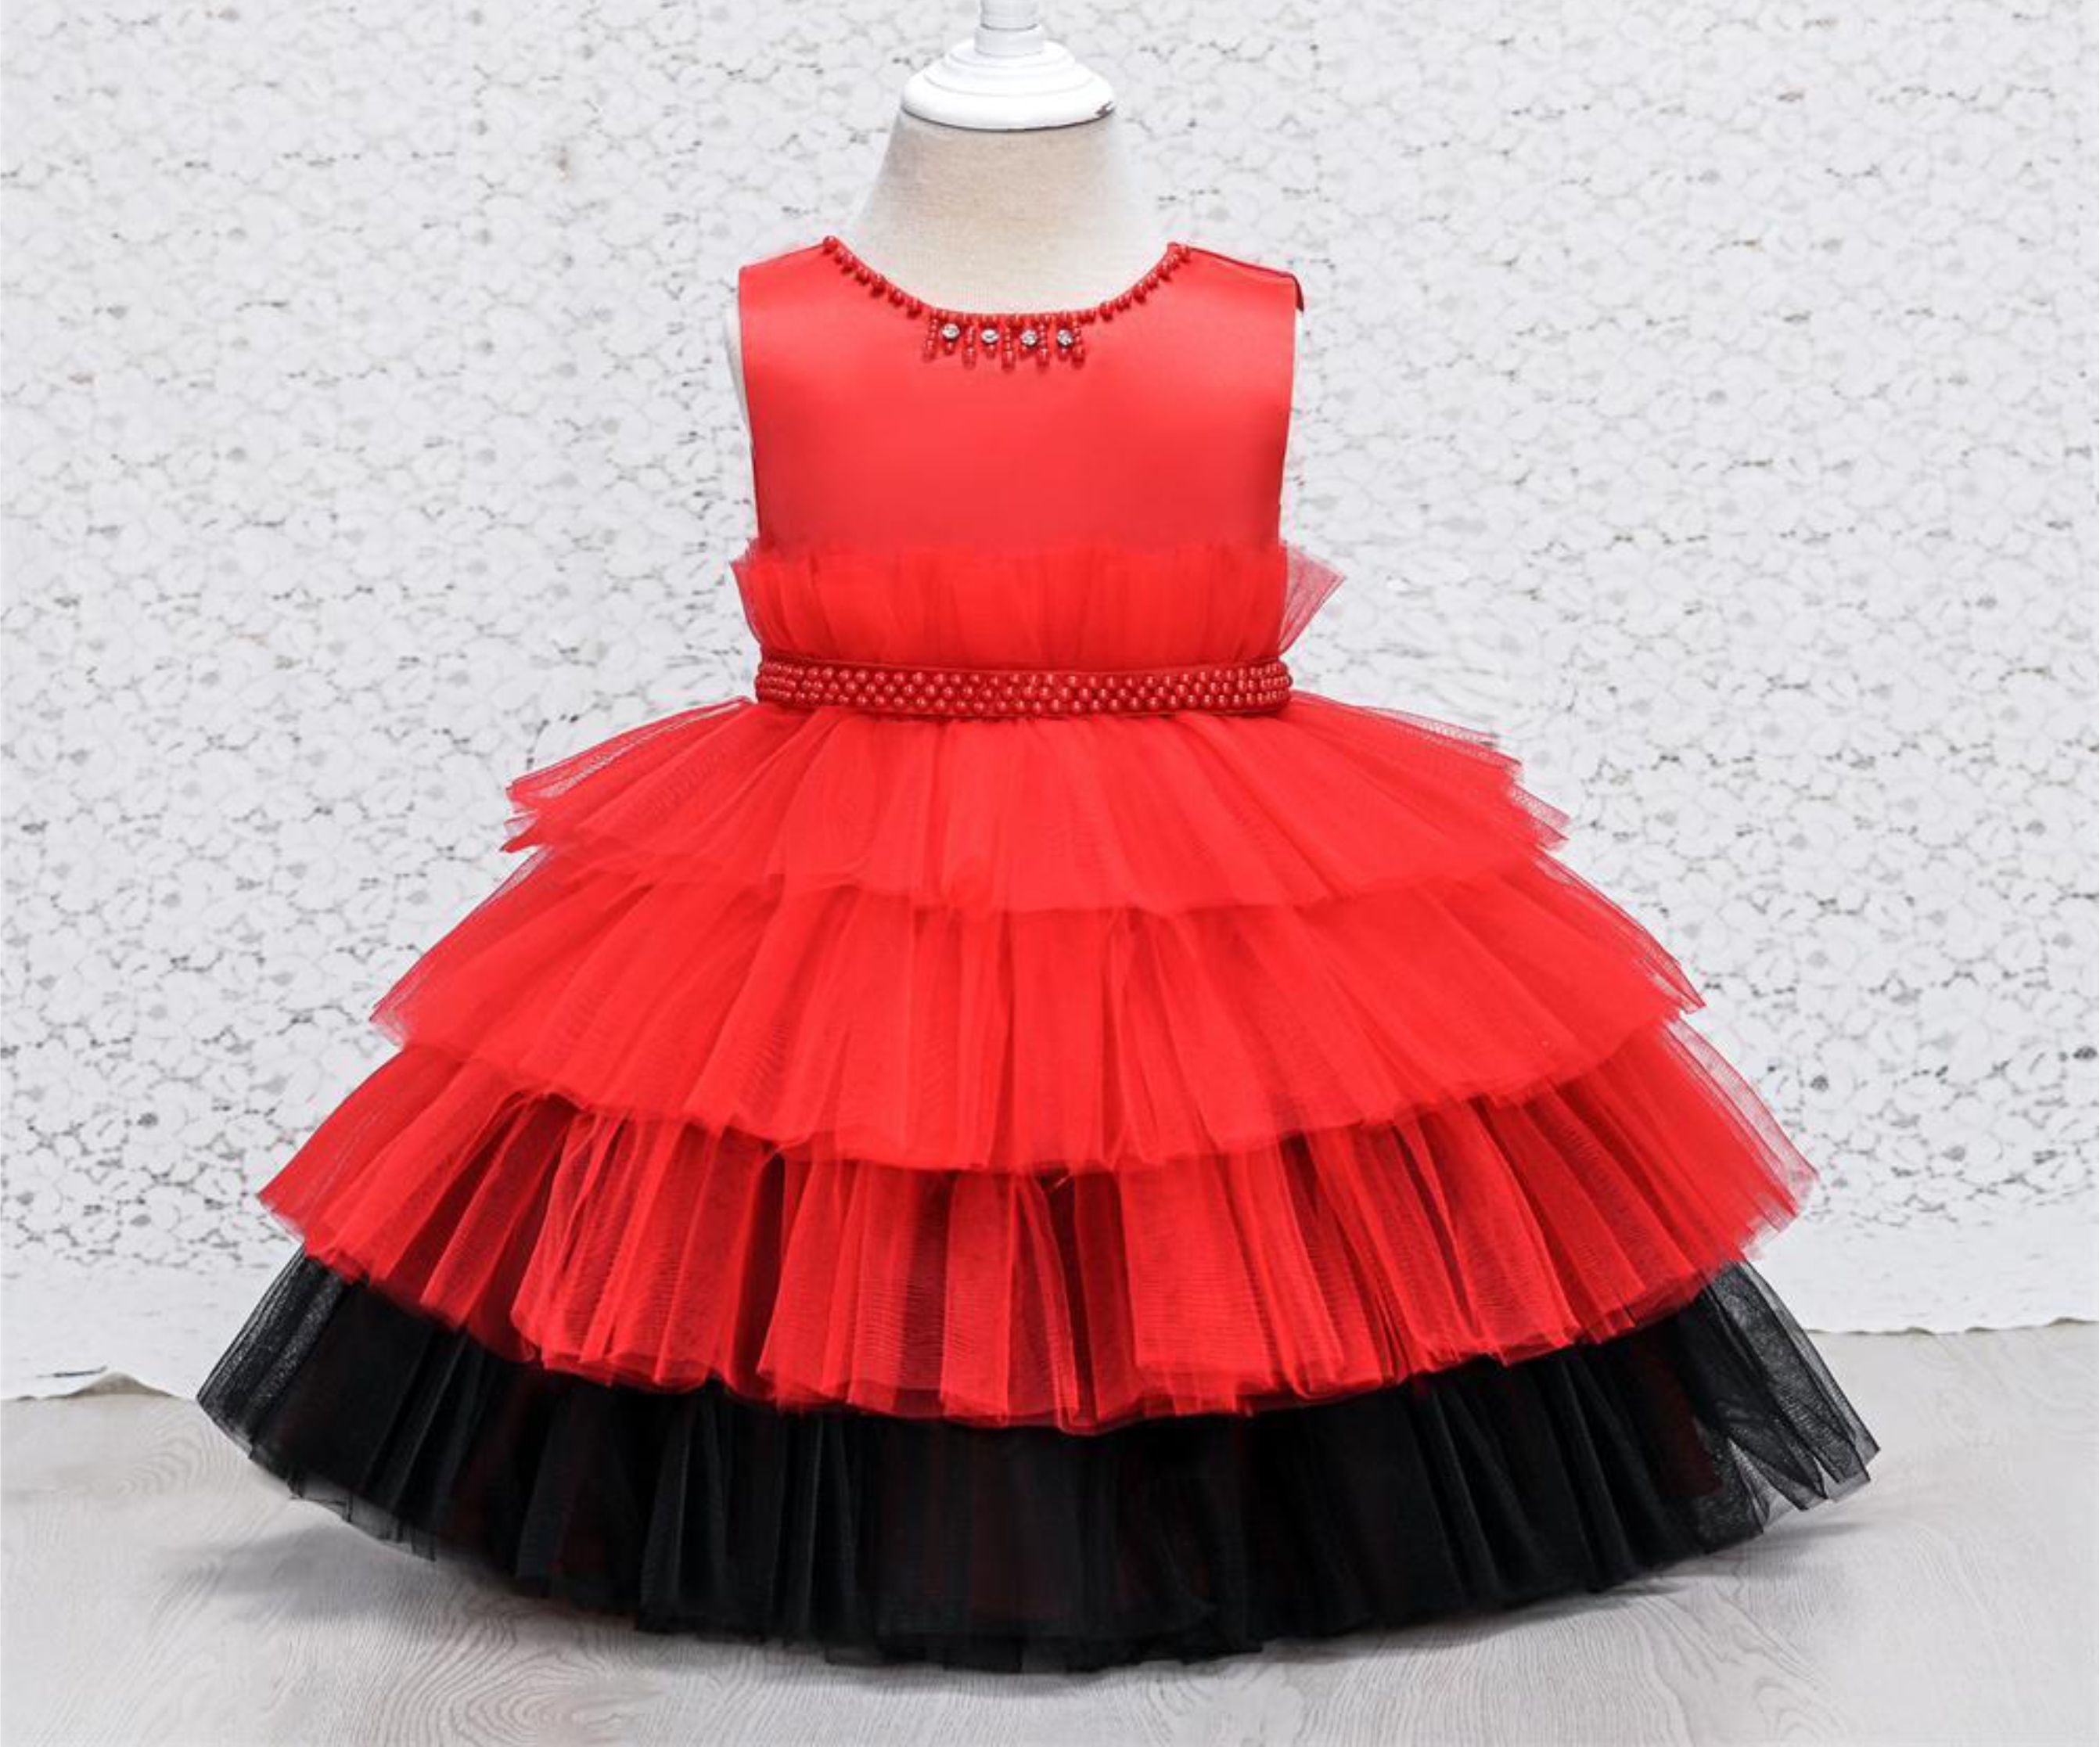 Sequin Cake Double Baby Girl Dress For 1st Birthday, Wedding, Christening  And Party Vestidos Pink Ballroom Gown Clothes From Wuhuamaa, $16.99 |  DHgate.Com